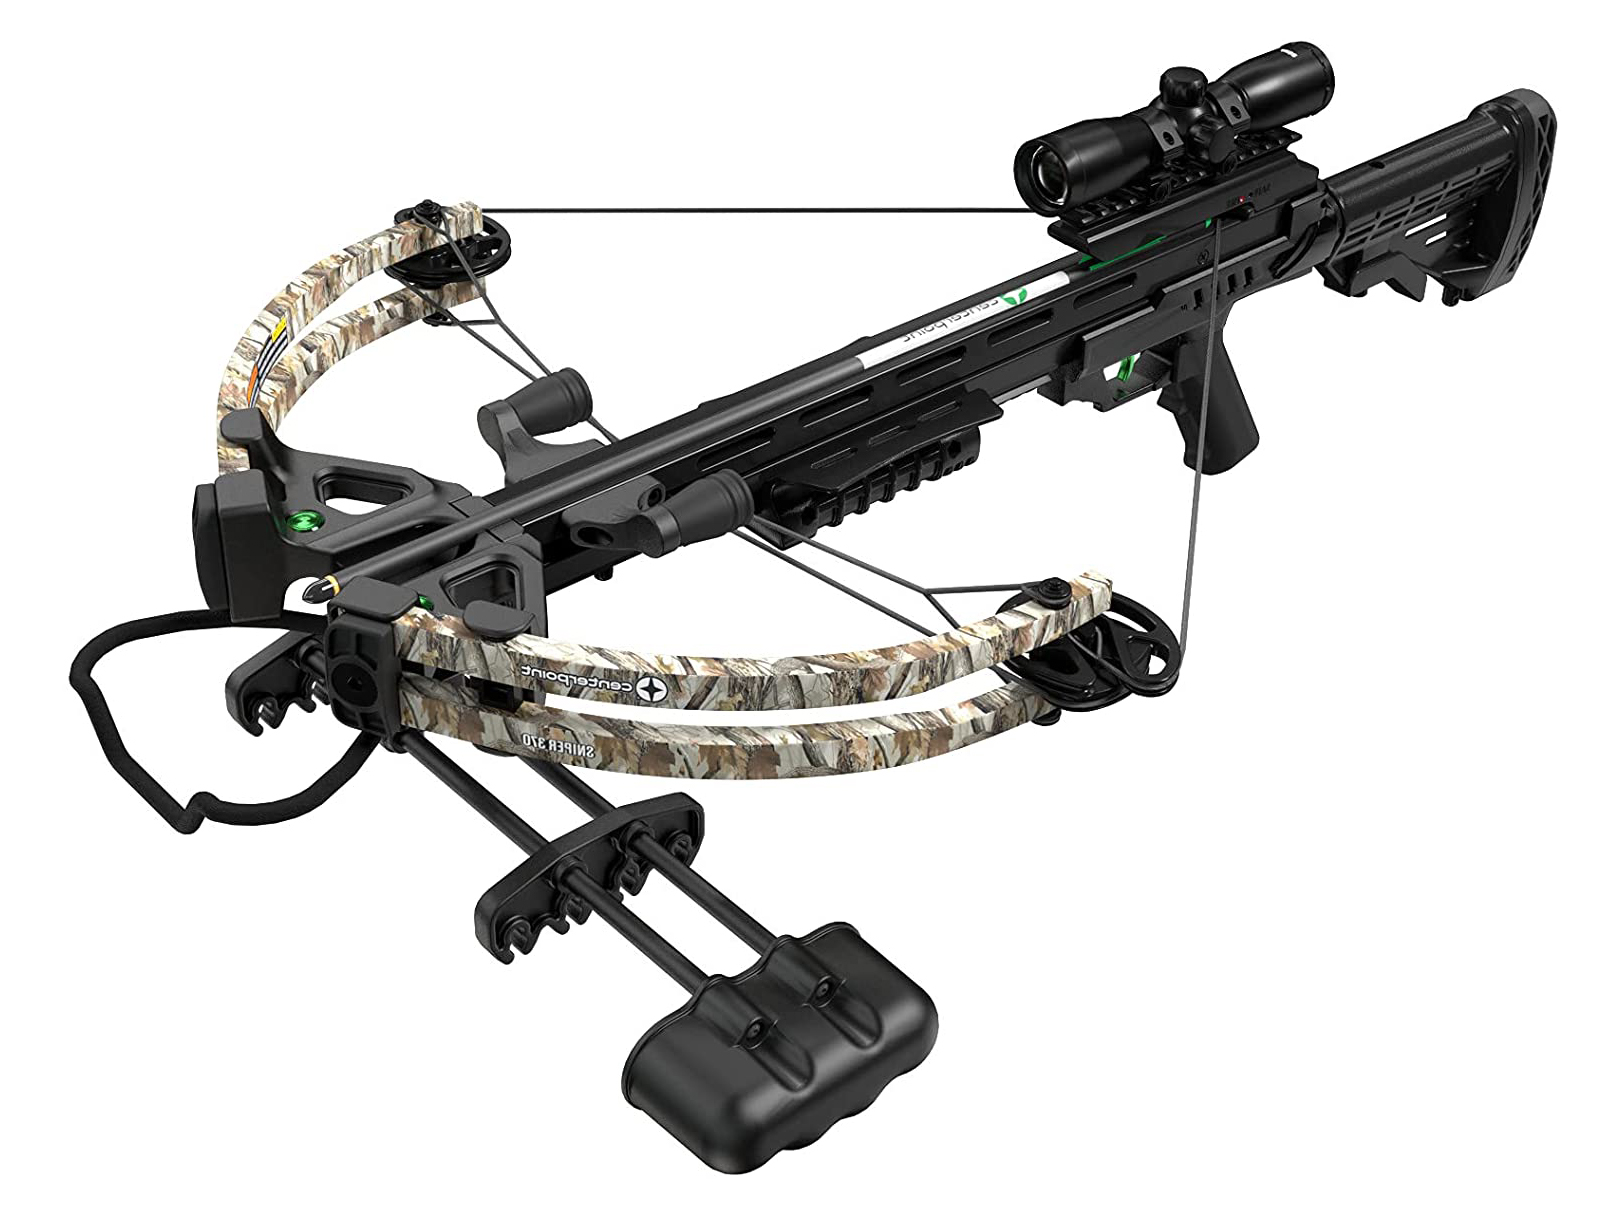 Sniper 370 compound crossbow by CenterPoint